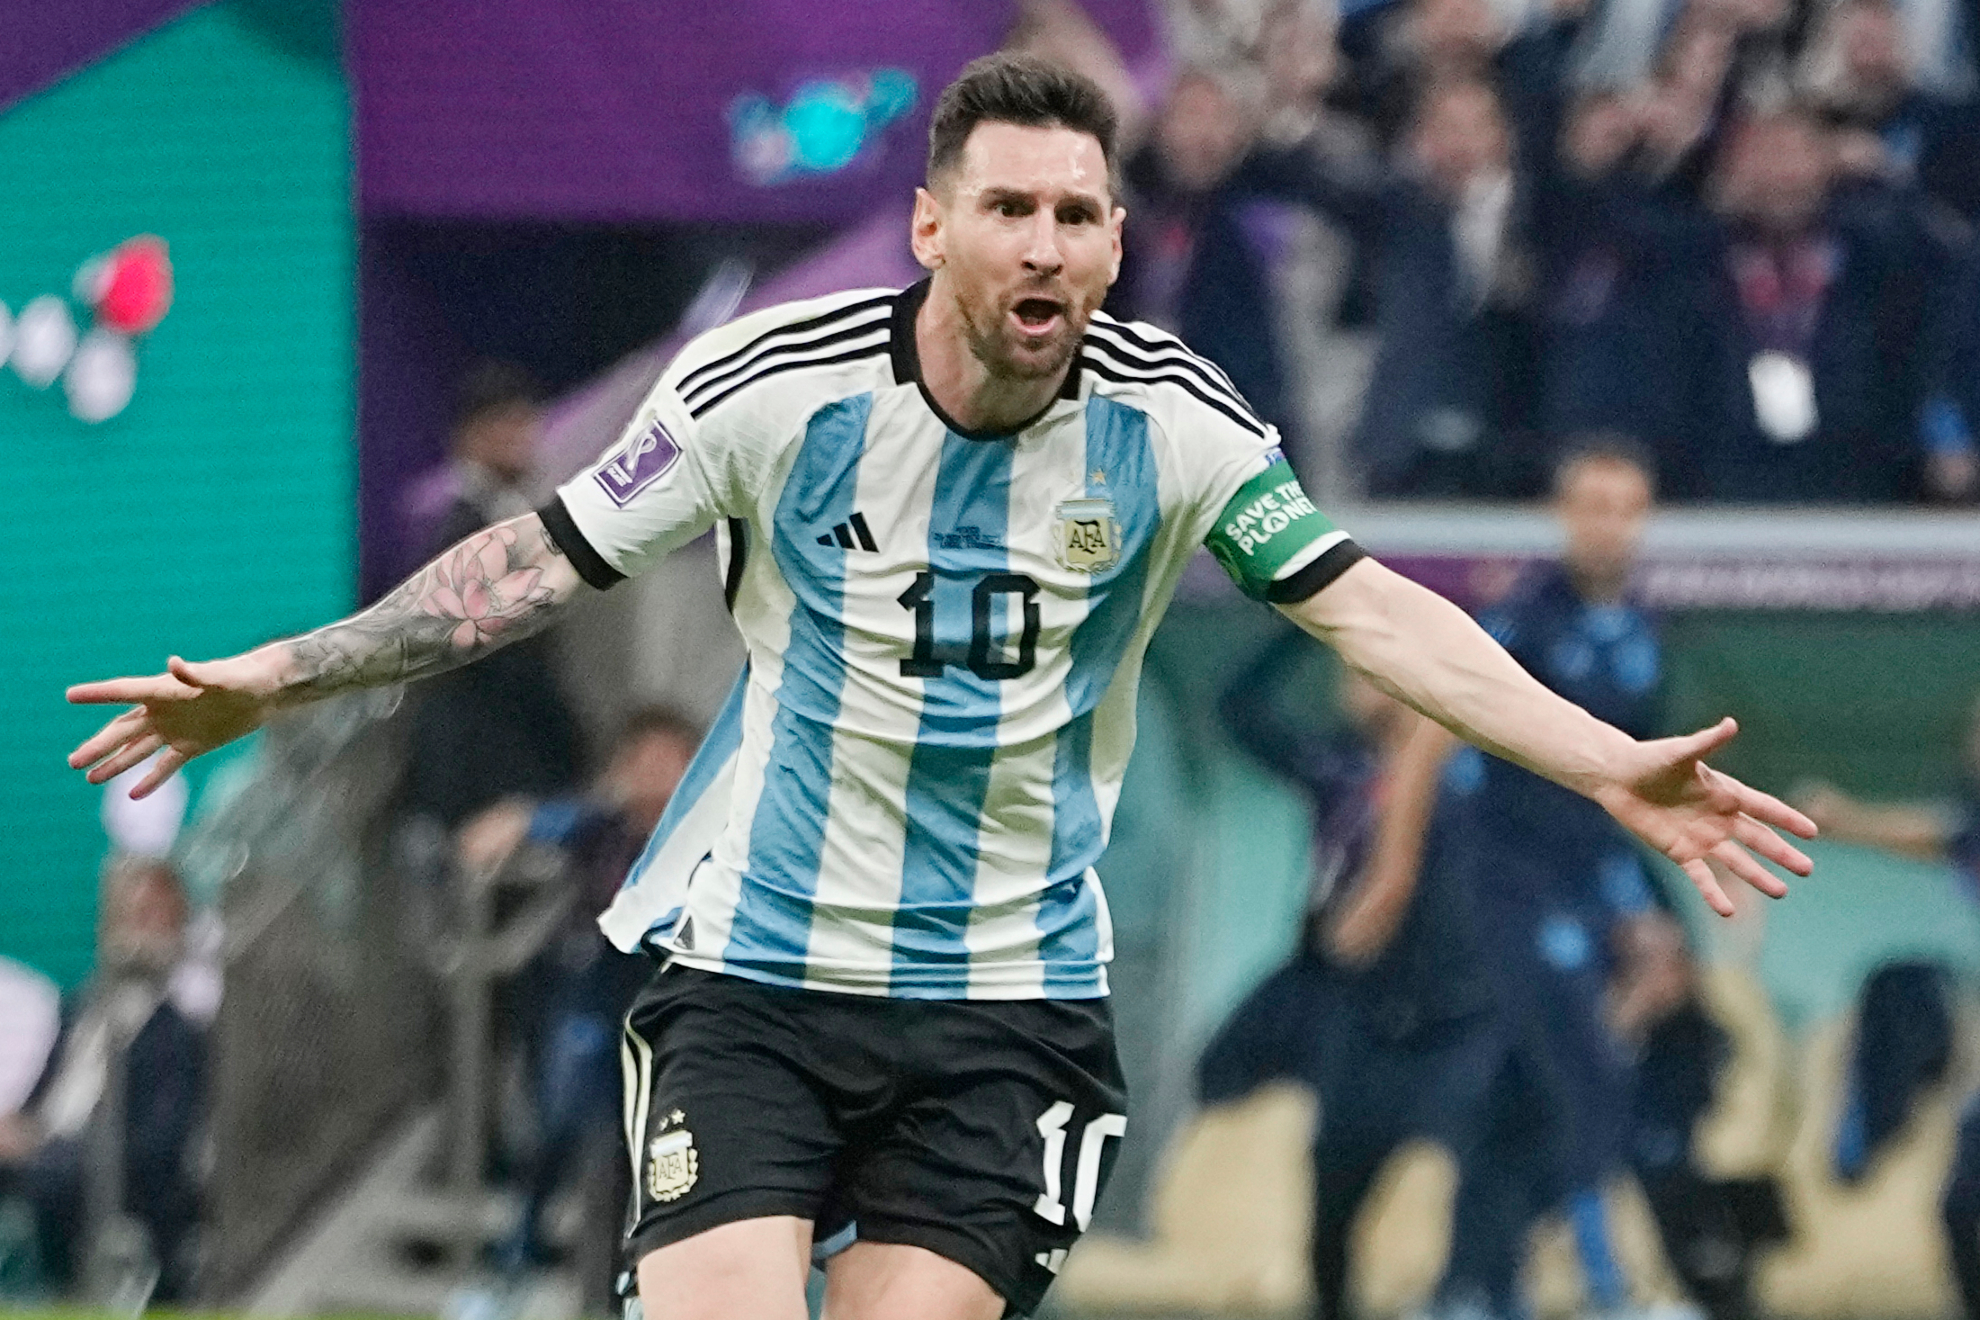 Lionel Messi scored a key goal for Argentina against Mexico in the World Cup.